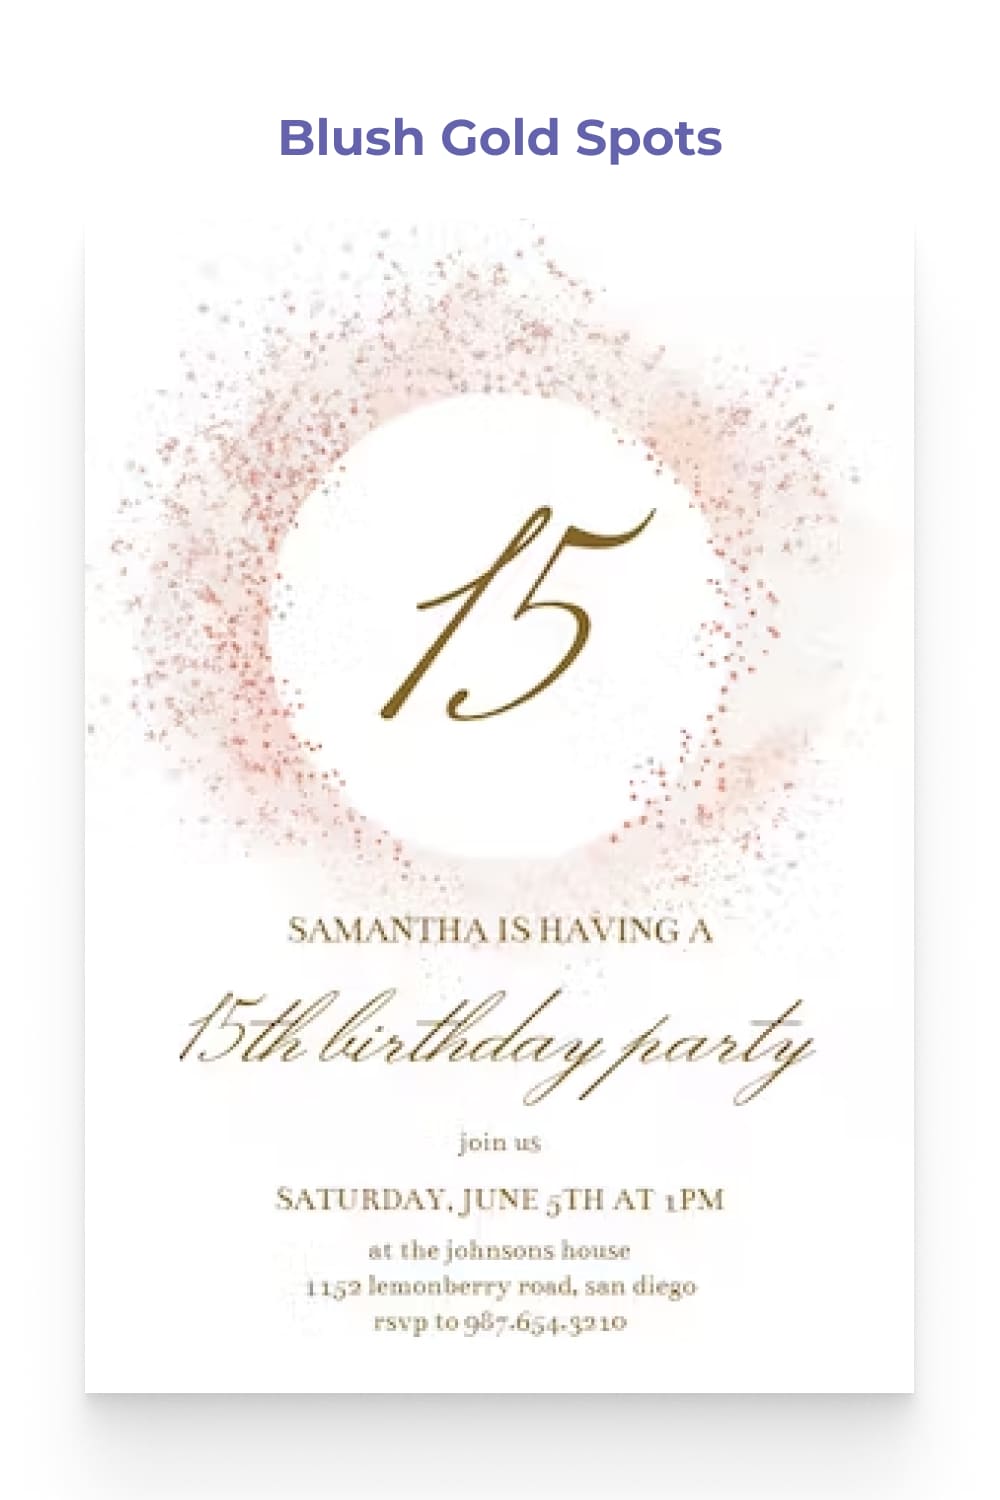 Birthday party invitation with circle and number 15.